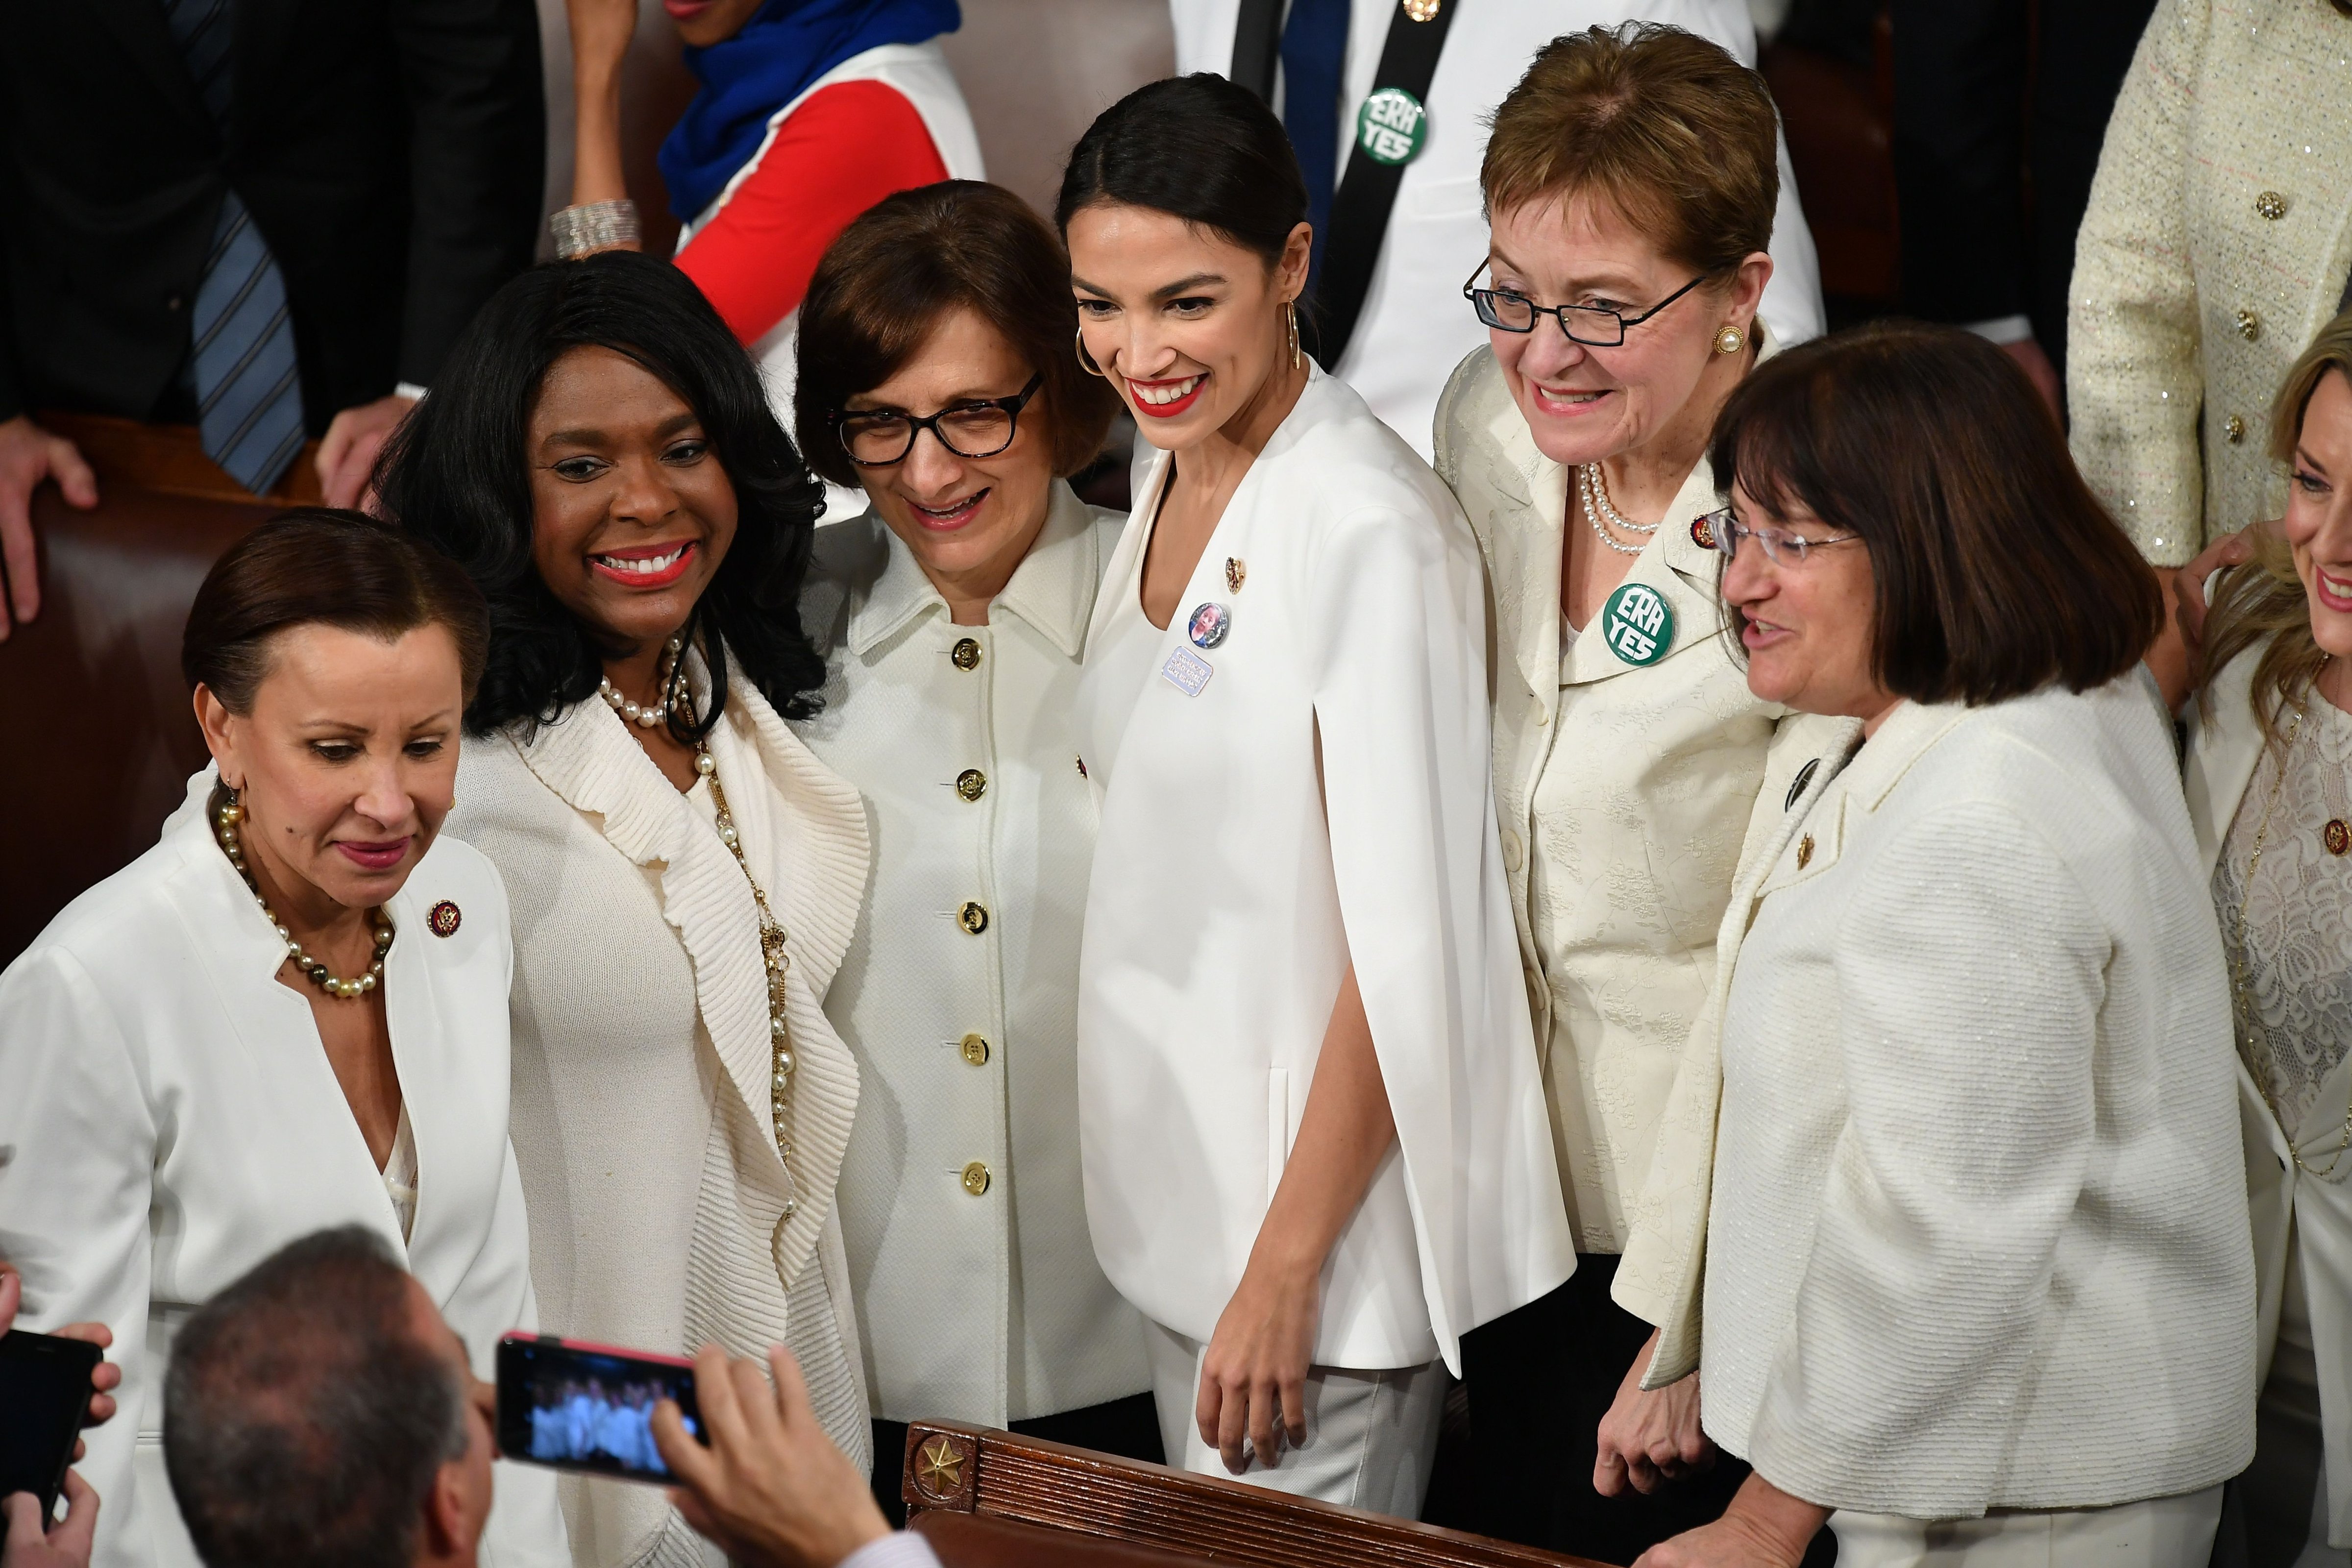 New York Representative (D) Alexandria Ocasio-Cortez (C) poses for a picture with other women ahead of U.S. President Donald Trump's State of the Union address at the US Capitol in Washington, D.C., on February 5, 2019. (Mandel Ngan—AFP/Getty Images)